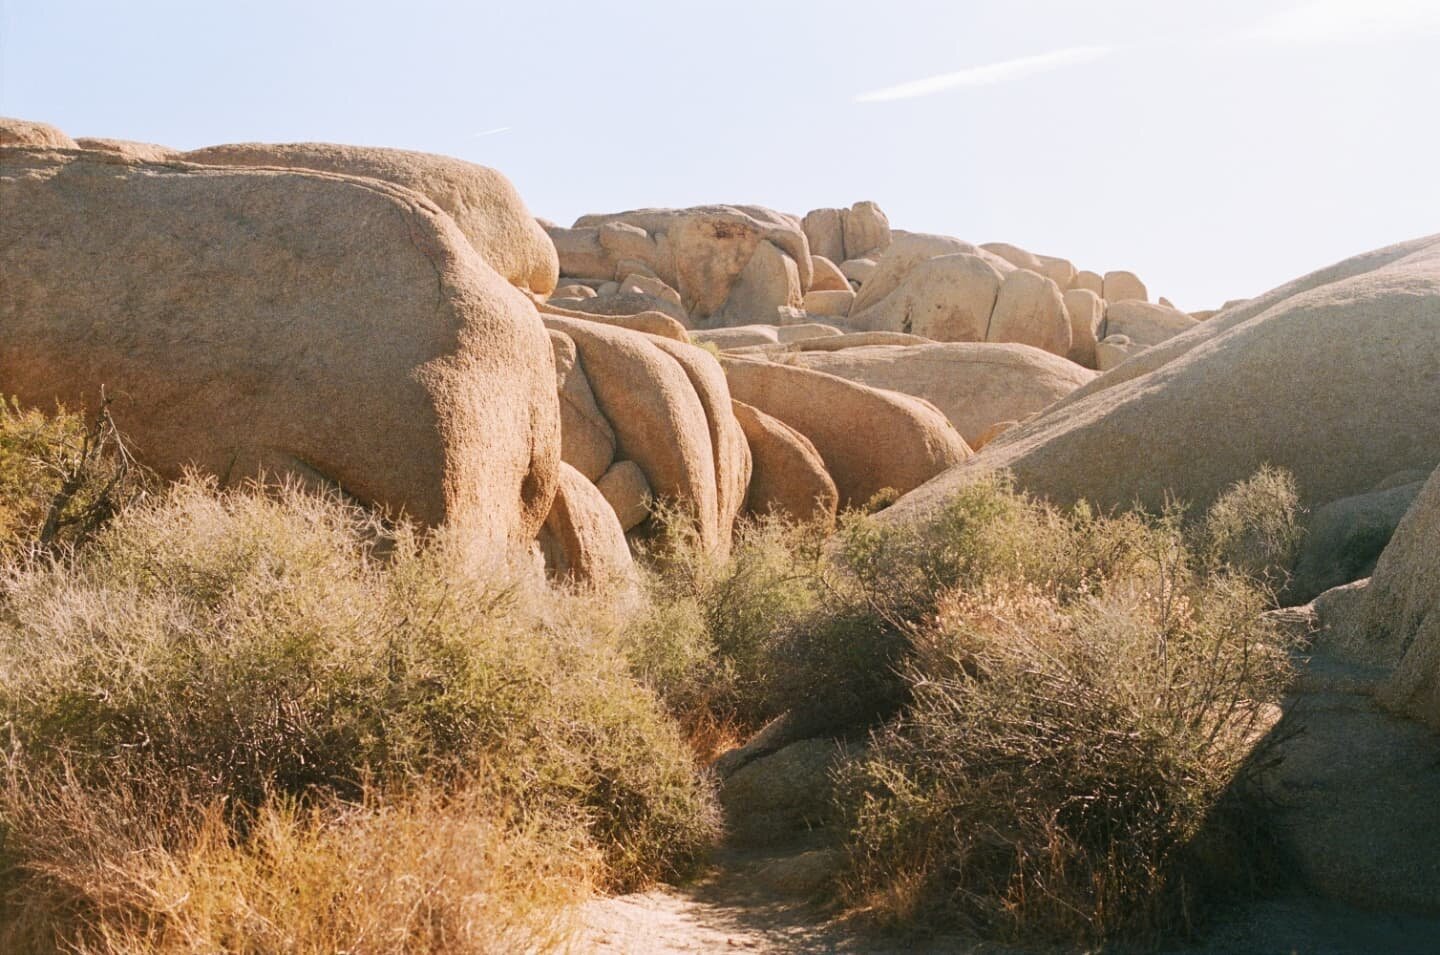 Don't mind me, will be posting Joshua Tree photos for the foreseeable future. 

Also that rock totally looks like a butt right??

#35mm #portra400 @nicefilmclub